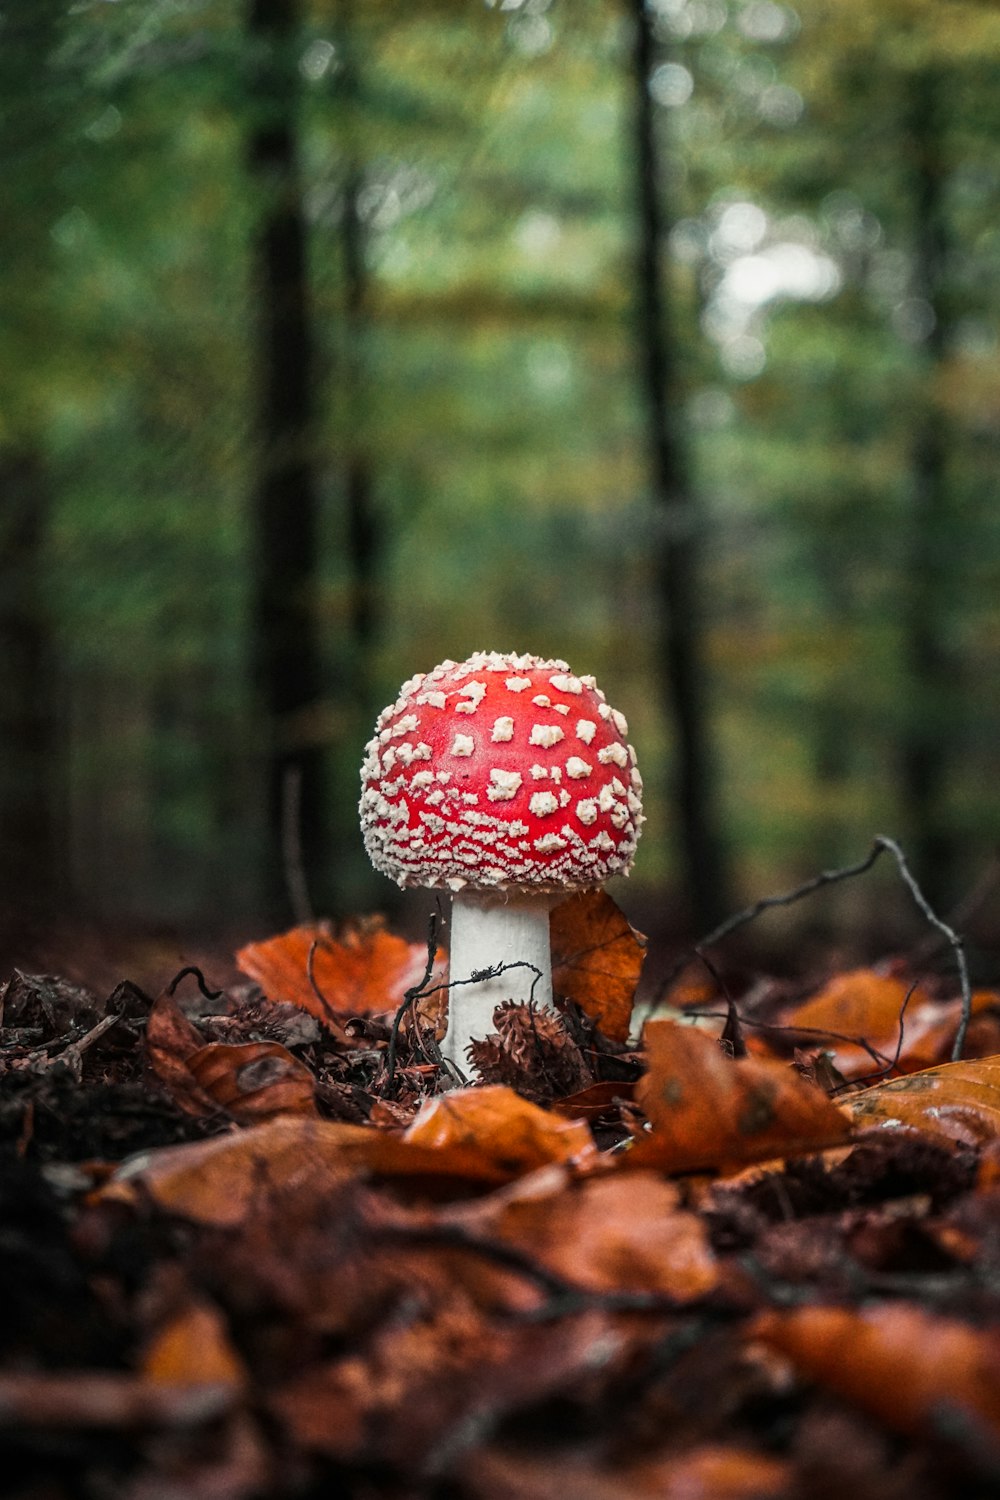 red and white mushroom in forest during daytime